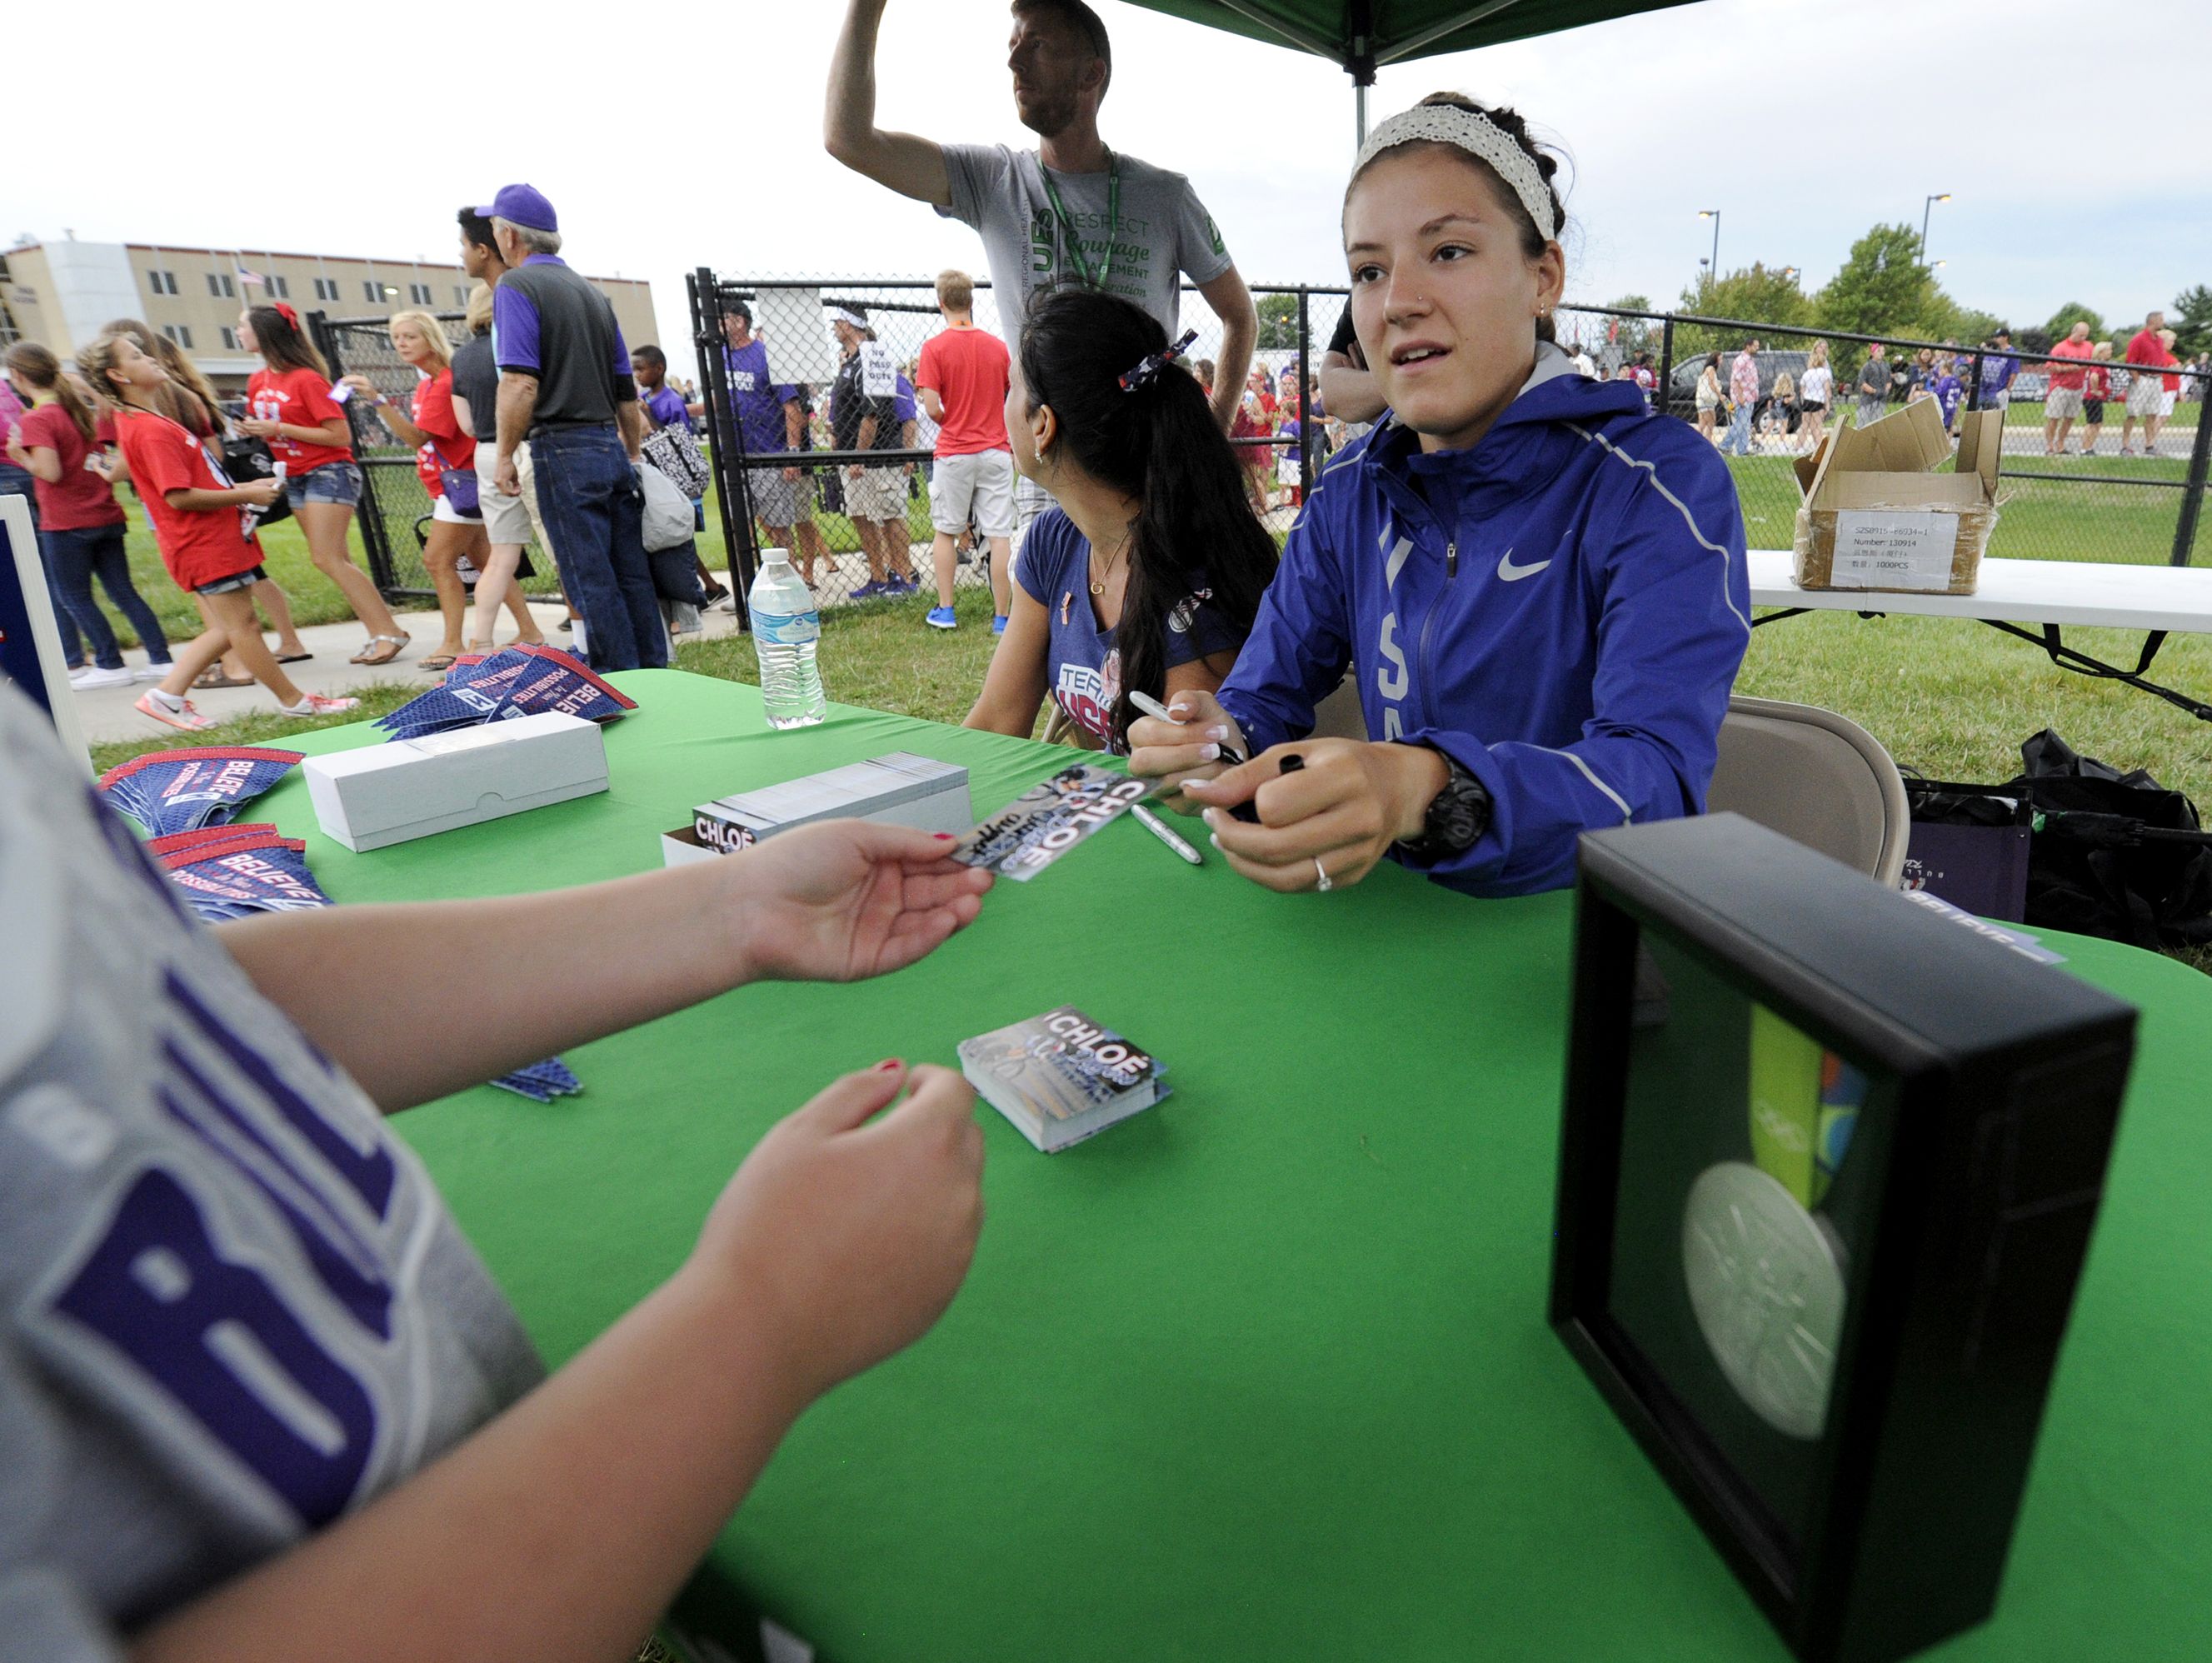 Olympic silver medalist Chloe Dygert signs autographs before a Brownsburg football game Aug. 26.